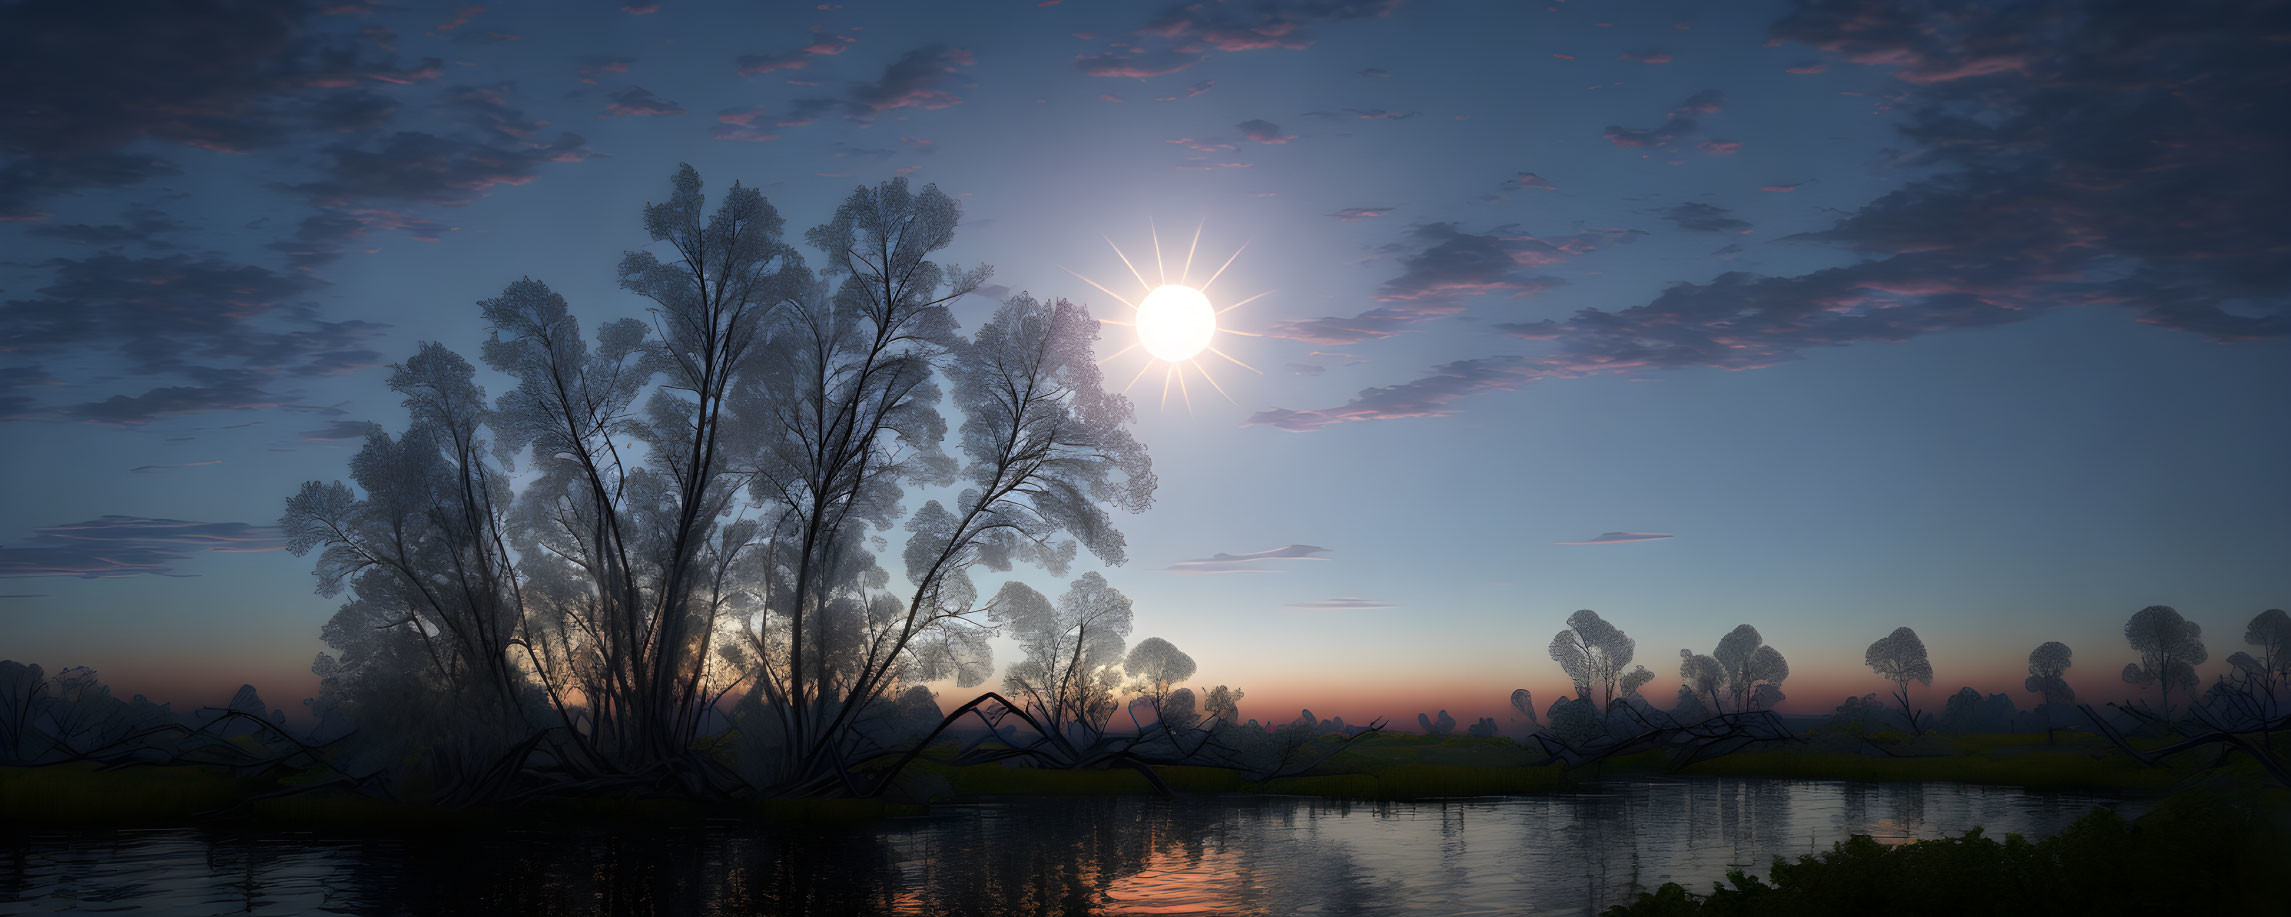 Sunset landscape water trees